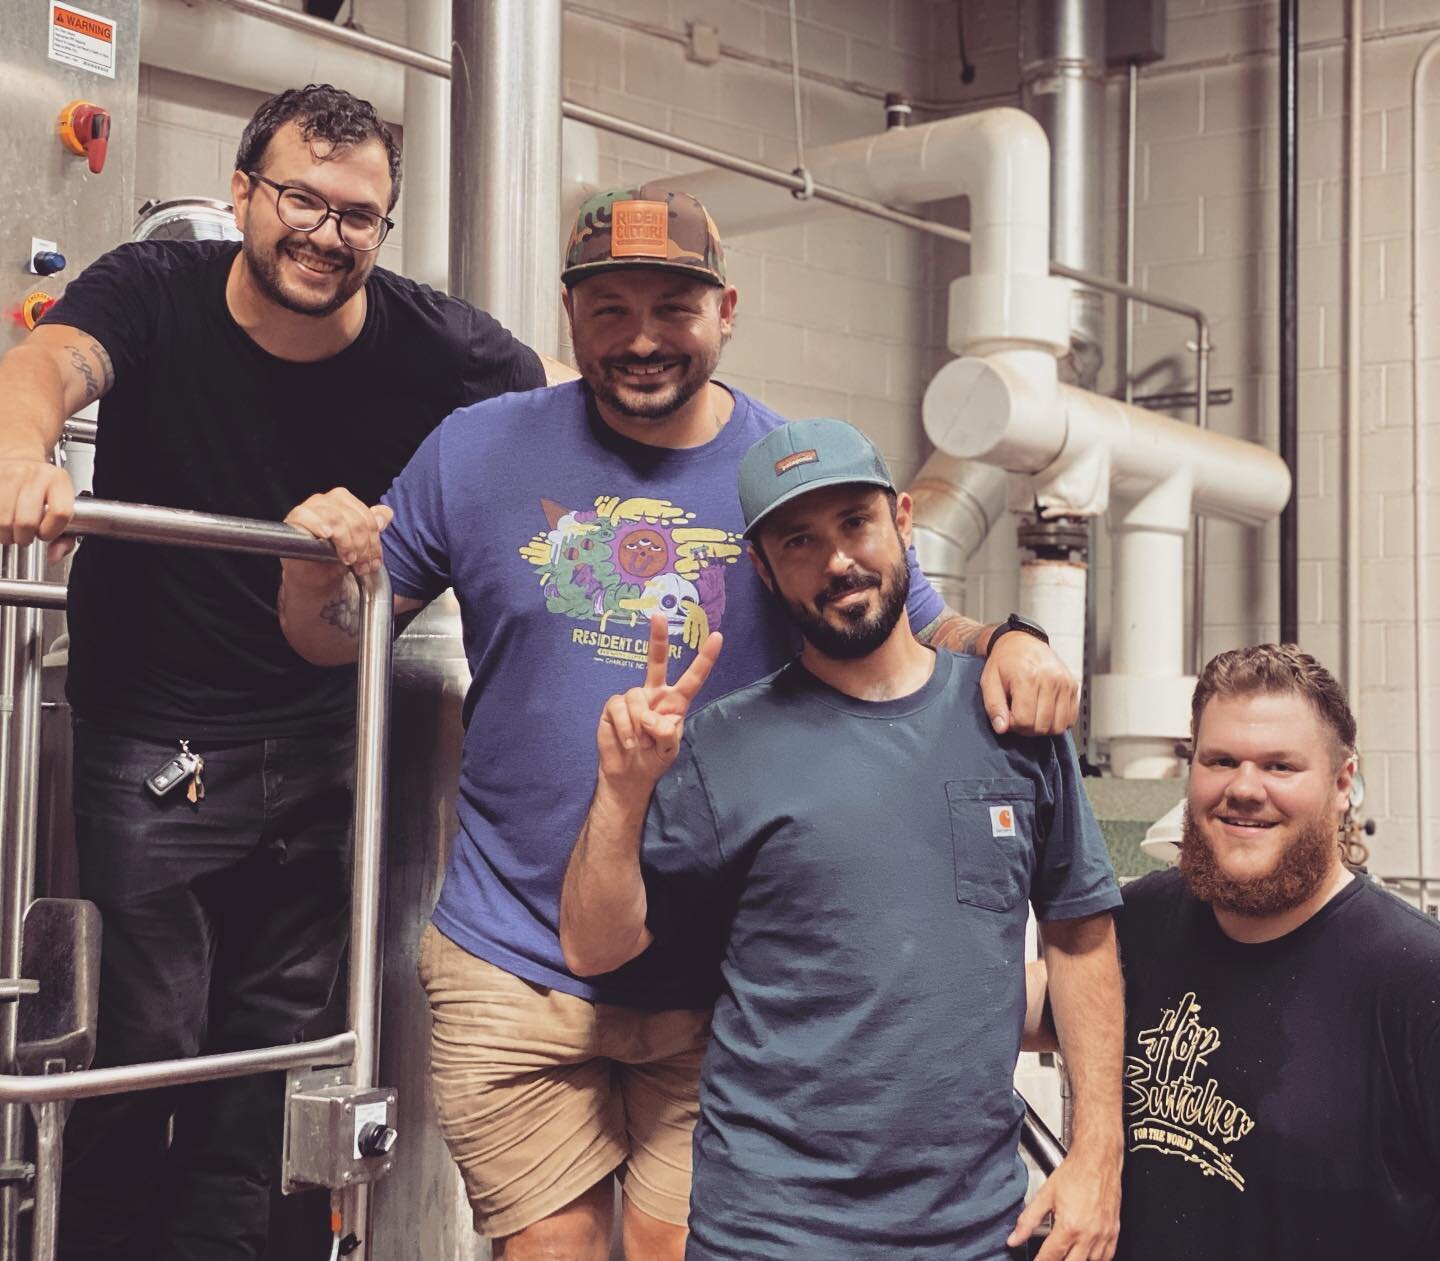 Today our buddy Jon from @residentculture out of Charlotte, North Carolina stopped by to brew up something of absolute stank. Coming soon, check out Pleasant Dank - a 2x IPA brewed with pilsner malt and flaked oats and hopped with Strata, El Dorado, 